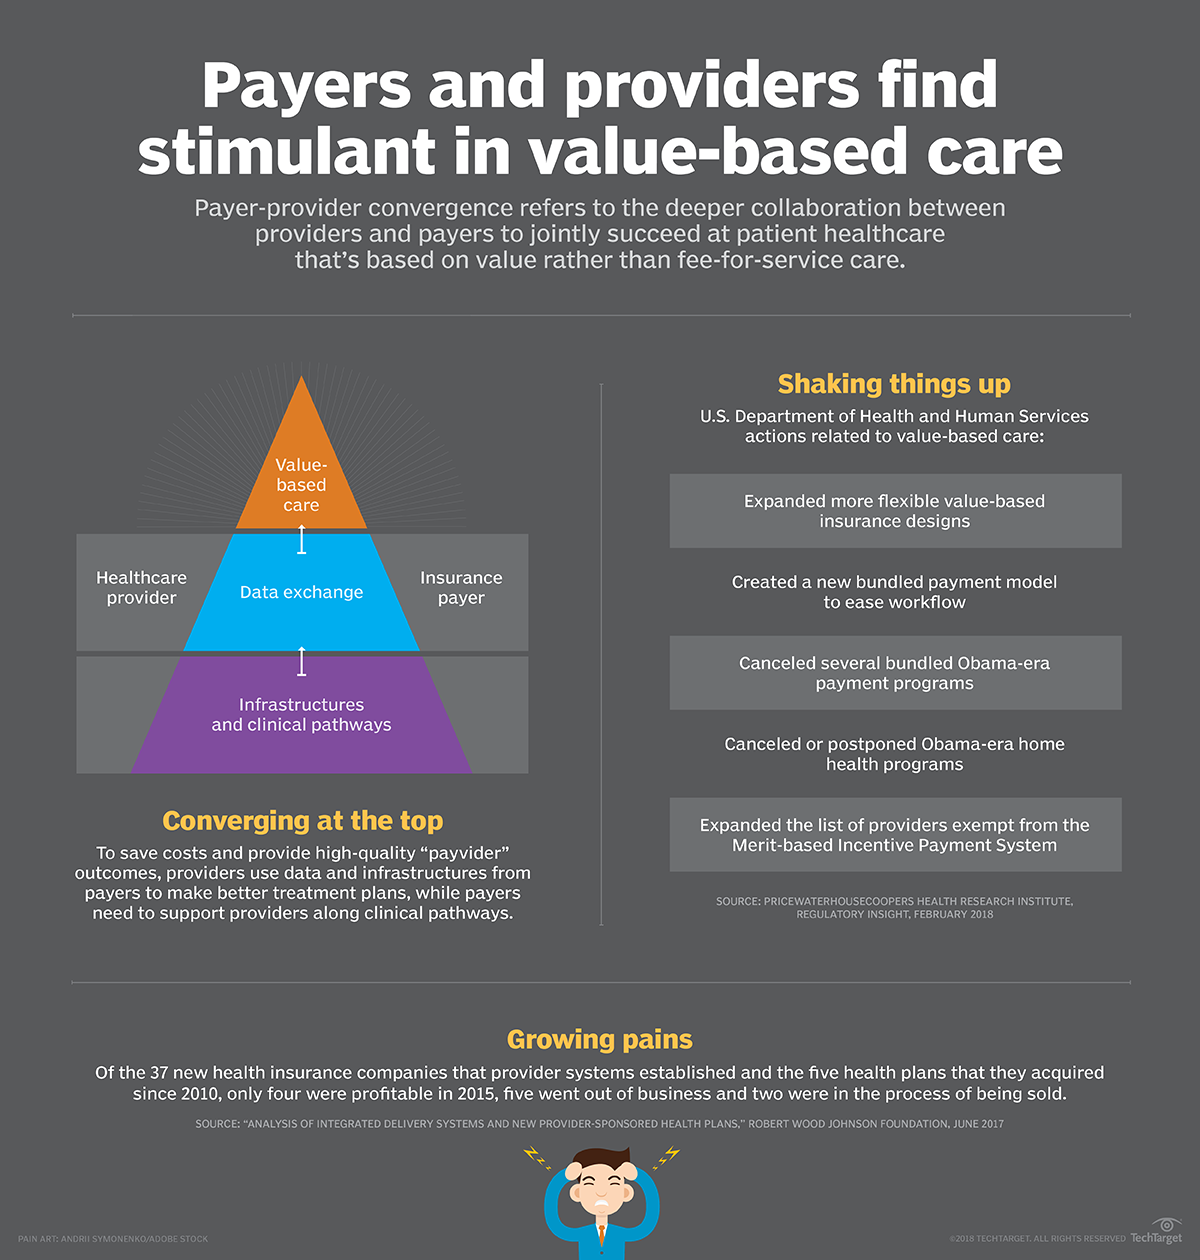 Value-based care spurs payer-provider convergence